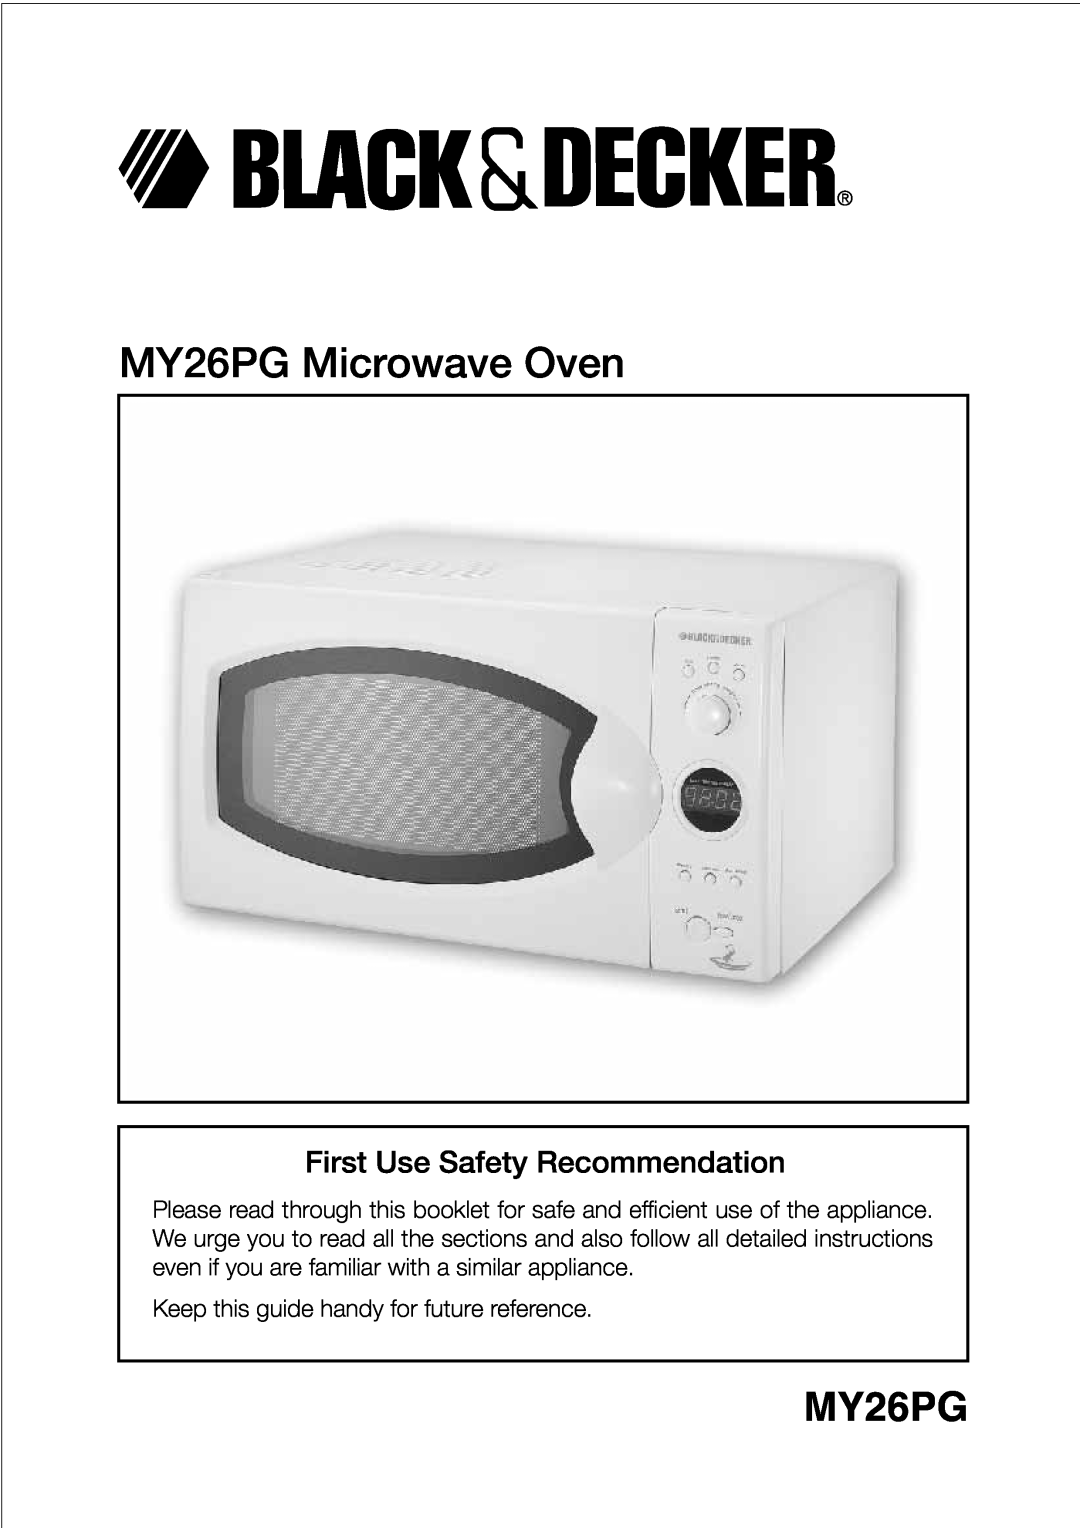 Black & Decker manual MY26PG Microwave Oven, First Use Safety Recommendation 